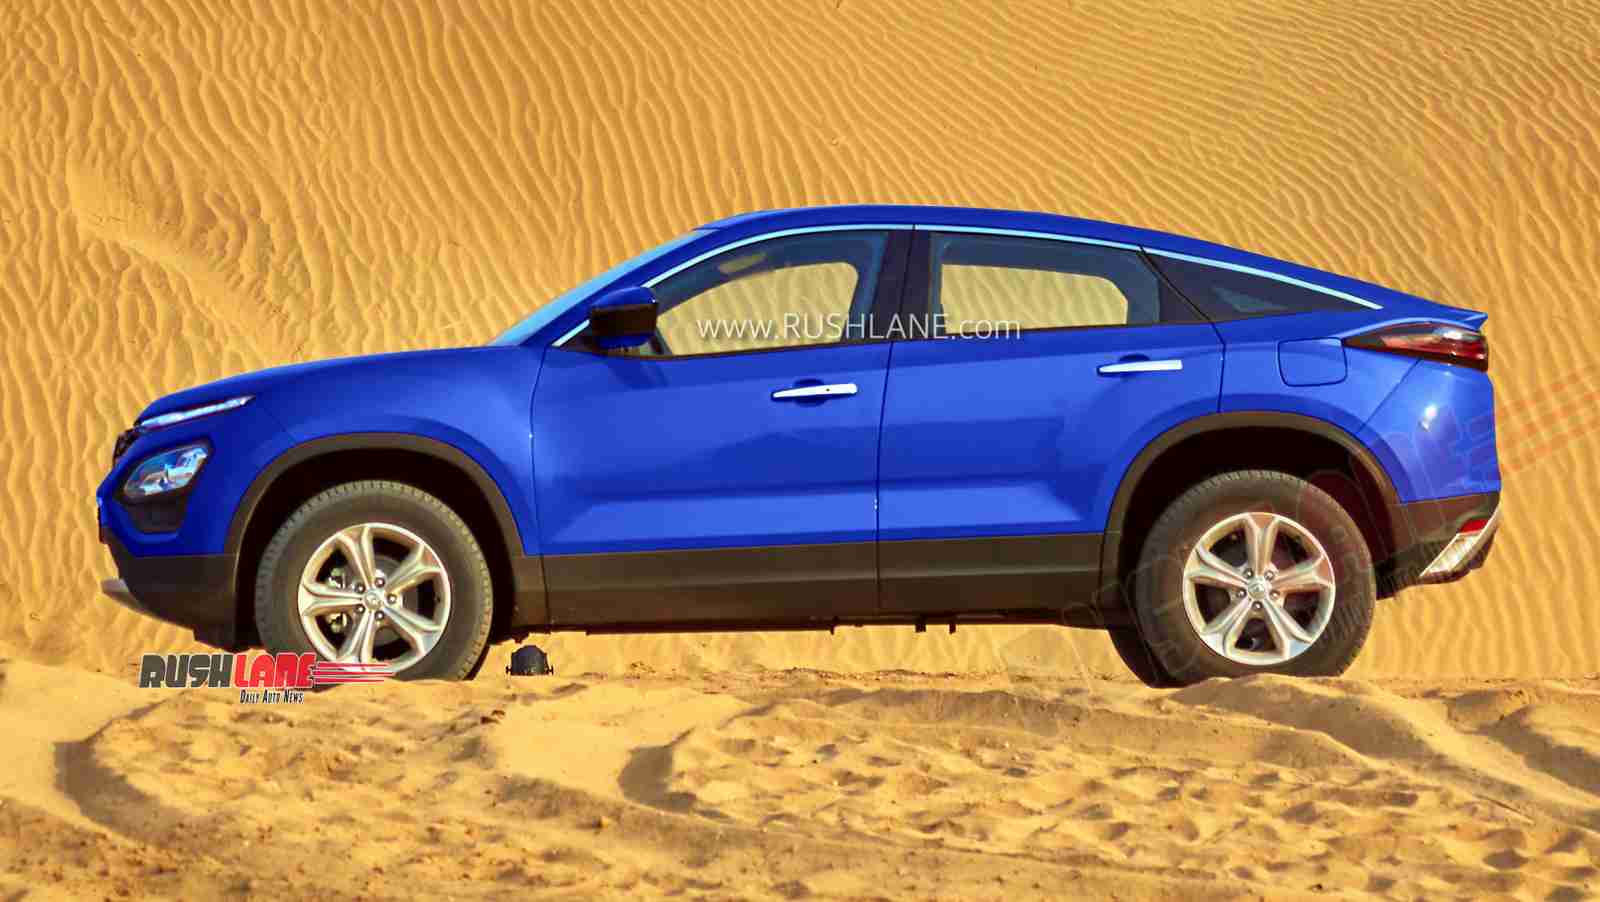 Tata Harrier coupe render.